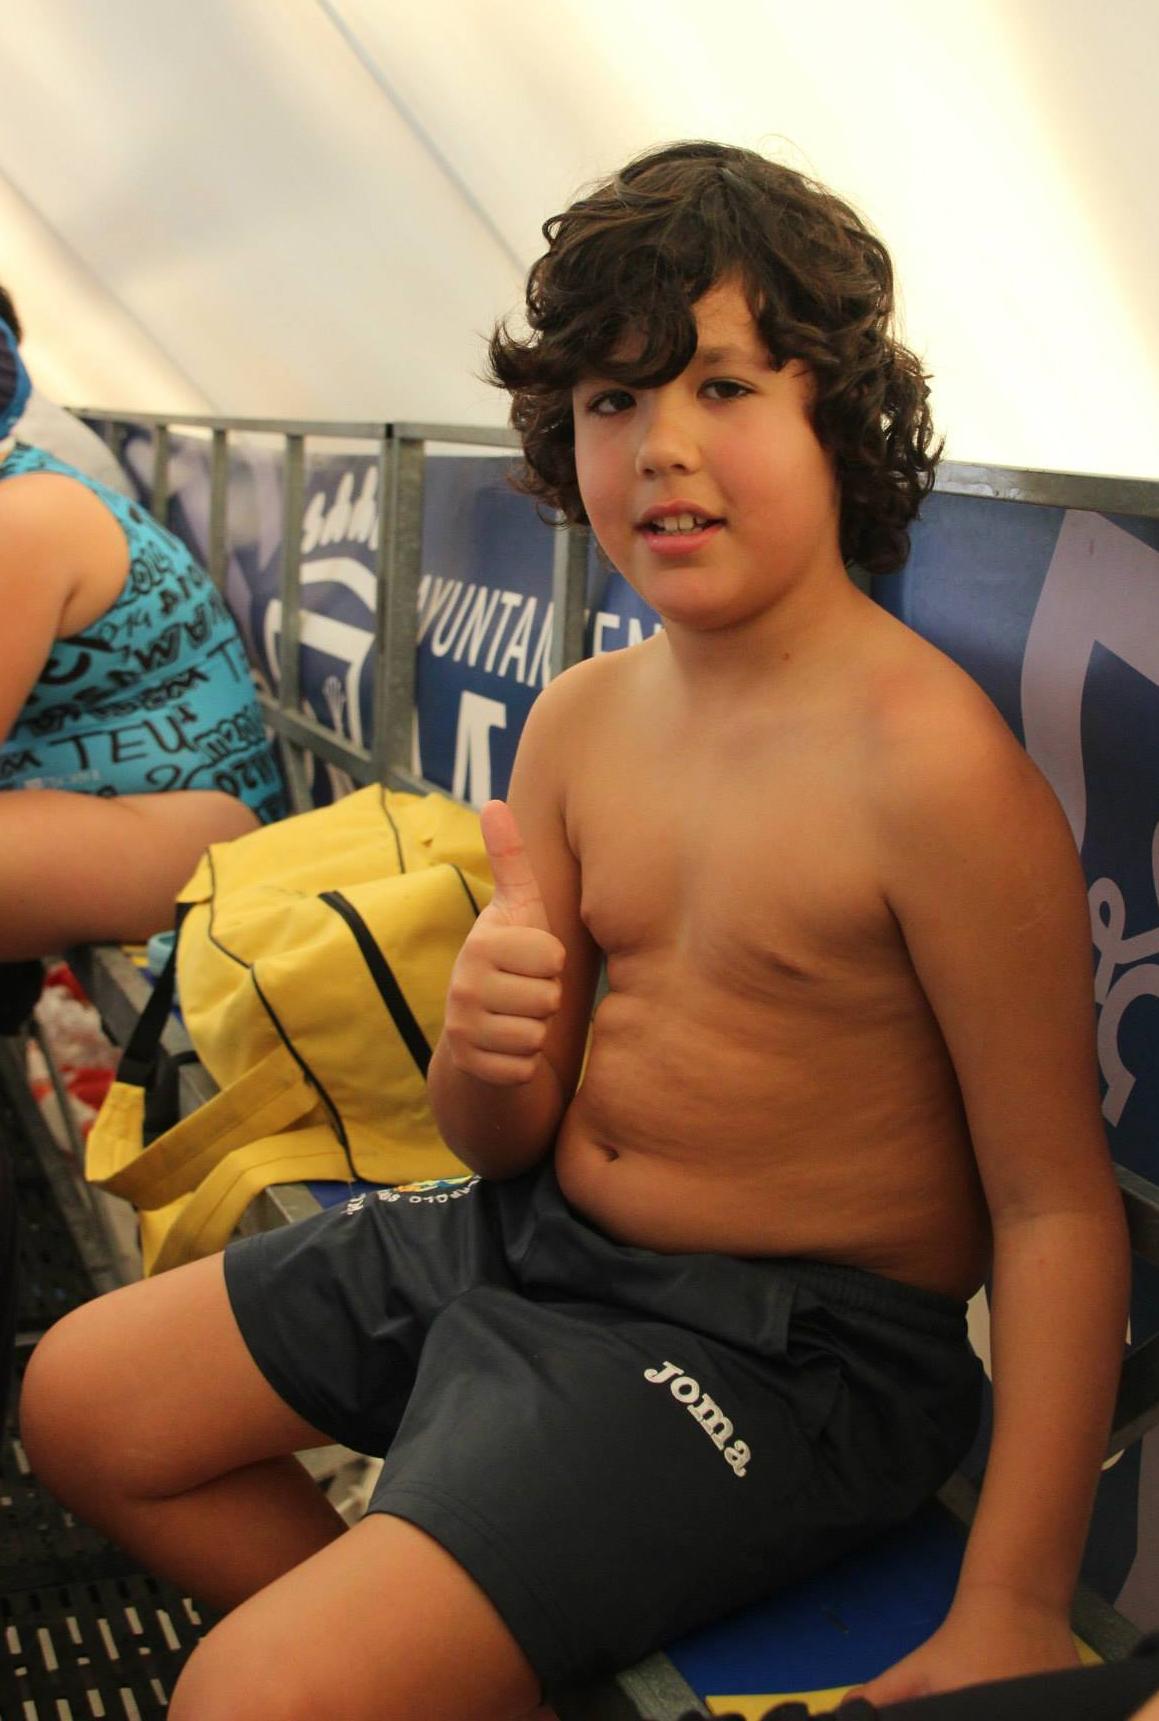 Waterpolo_Spain_Boys_are_fat_21.